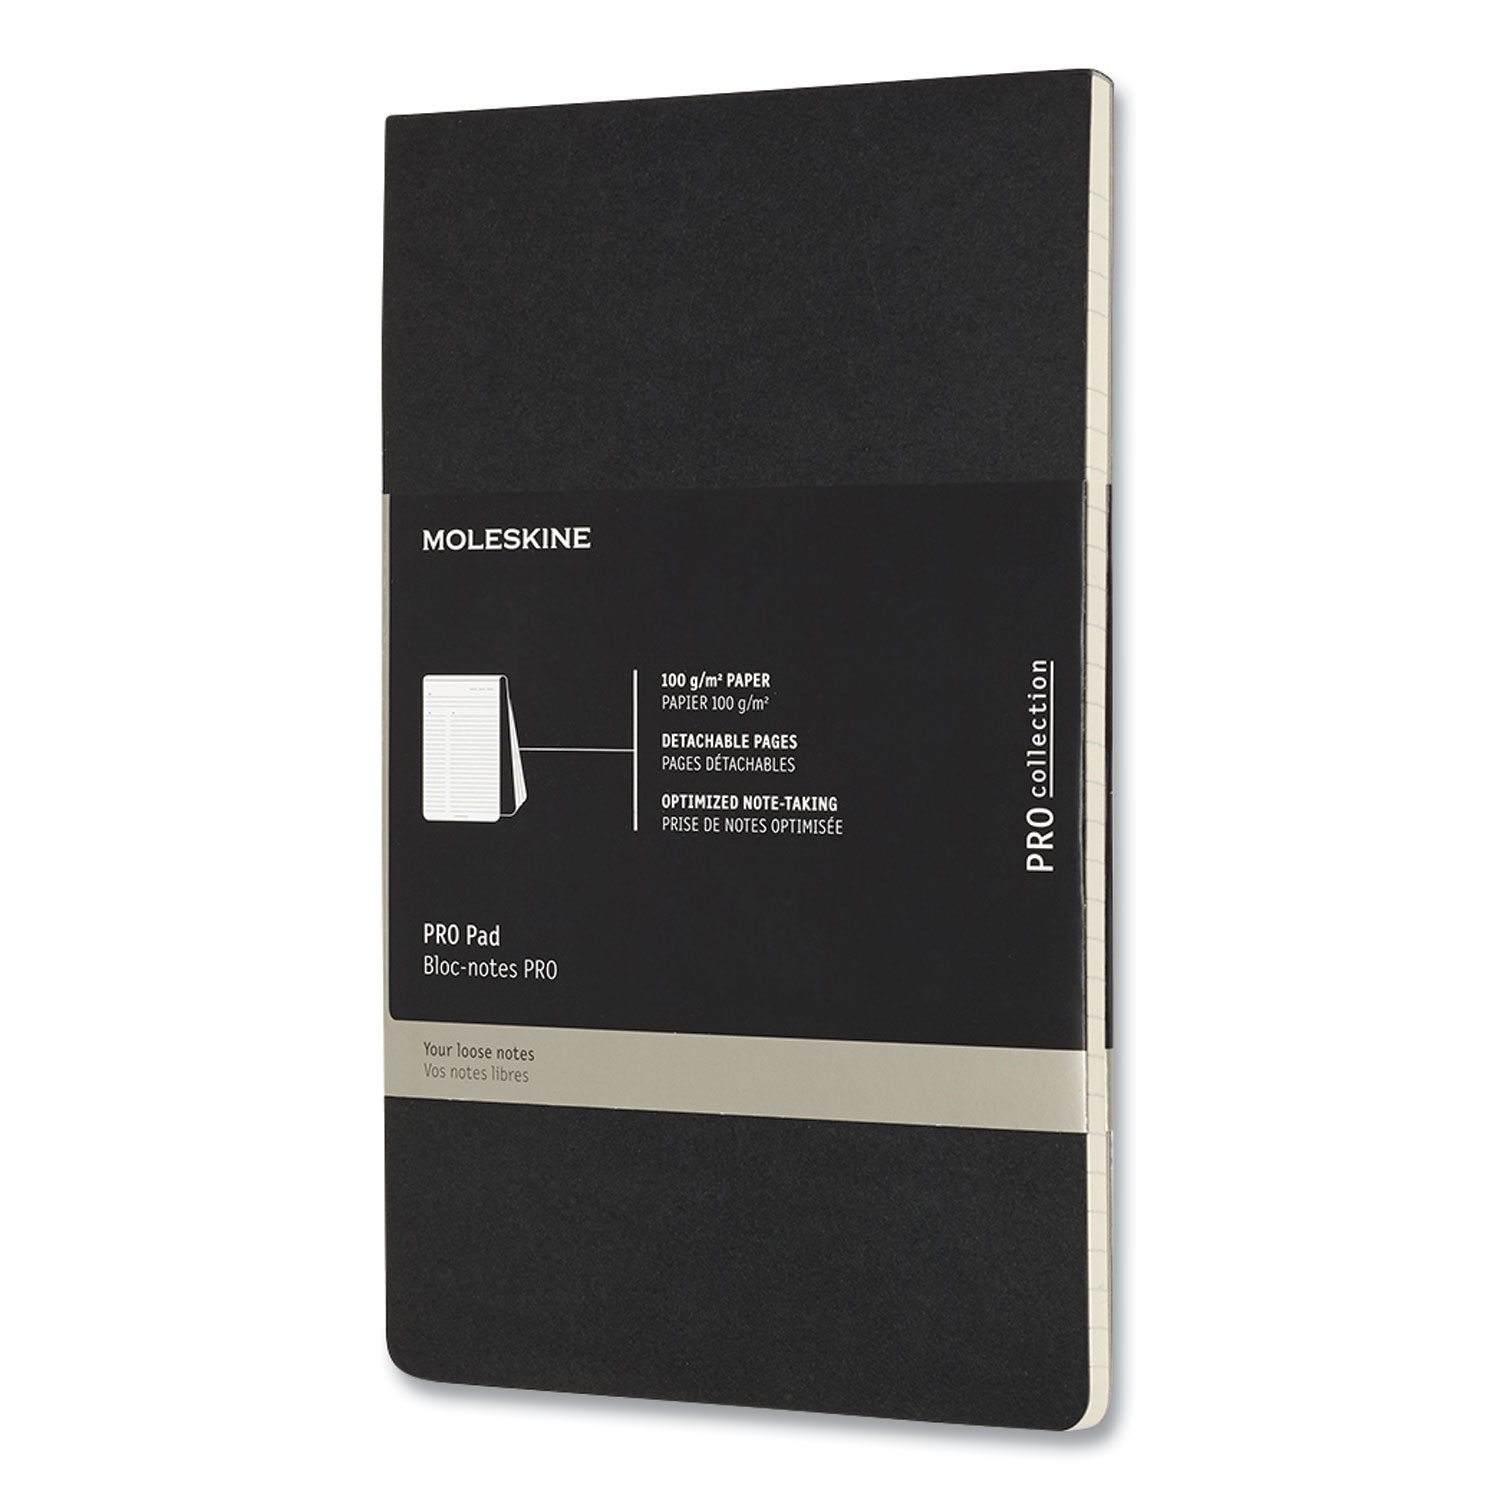  Moleskine 620916 PRO Pad, Narrow Ruled, Black Cover, 5 x 8.25, 96 Pages (HBG24324082) 